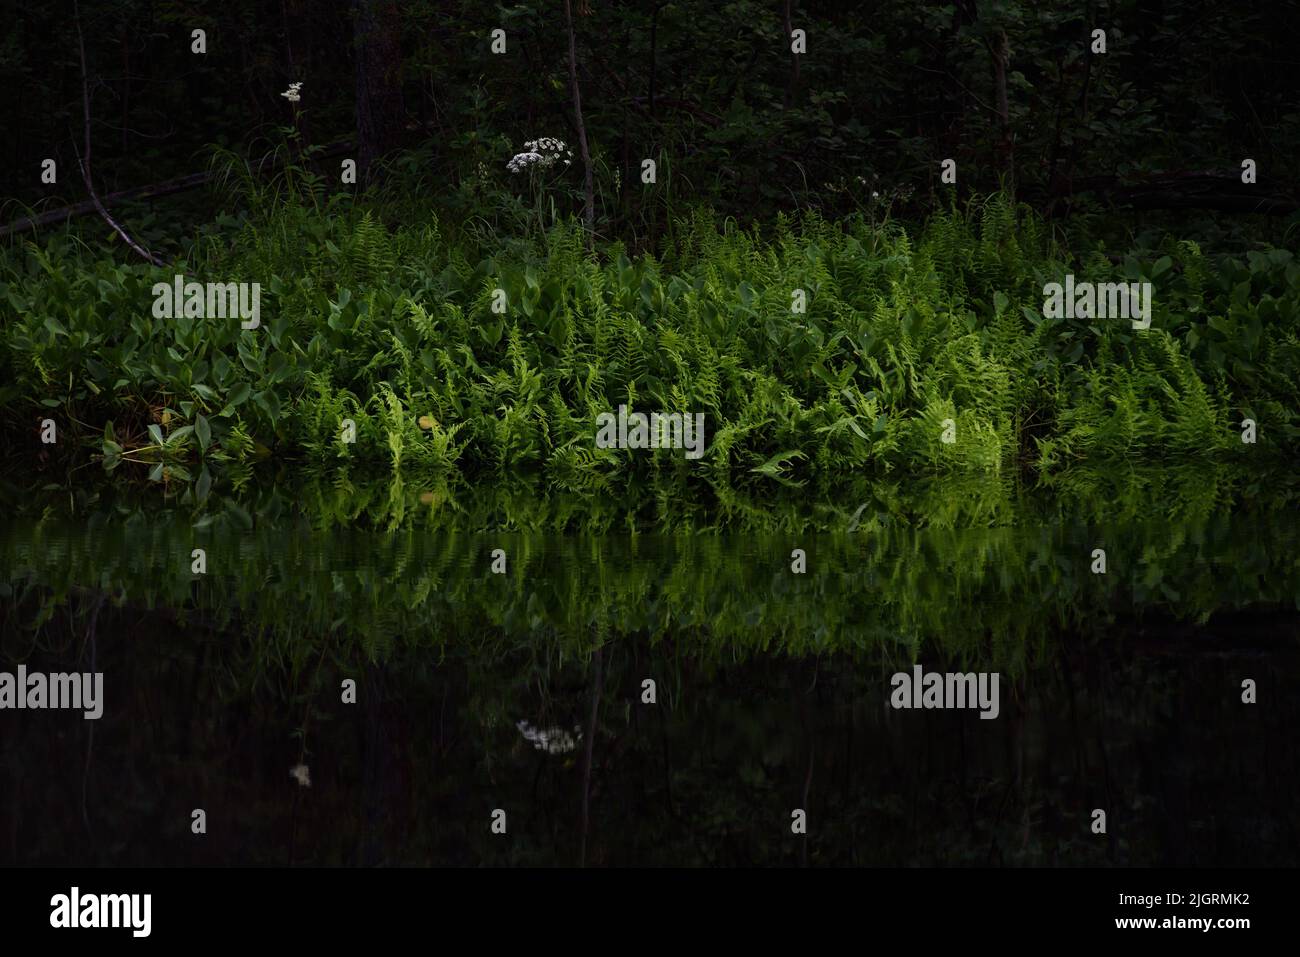 View of the forest lake in summer after sunset. The lake is surrounded by a bright green fern, which is reflected in the howl creating an abstract pat Stock Photo